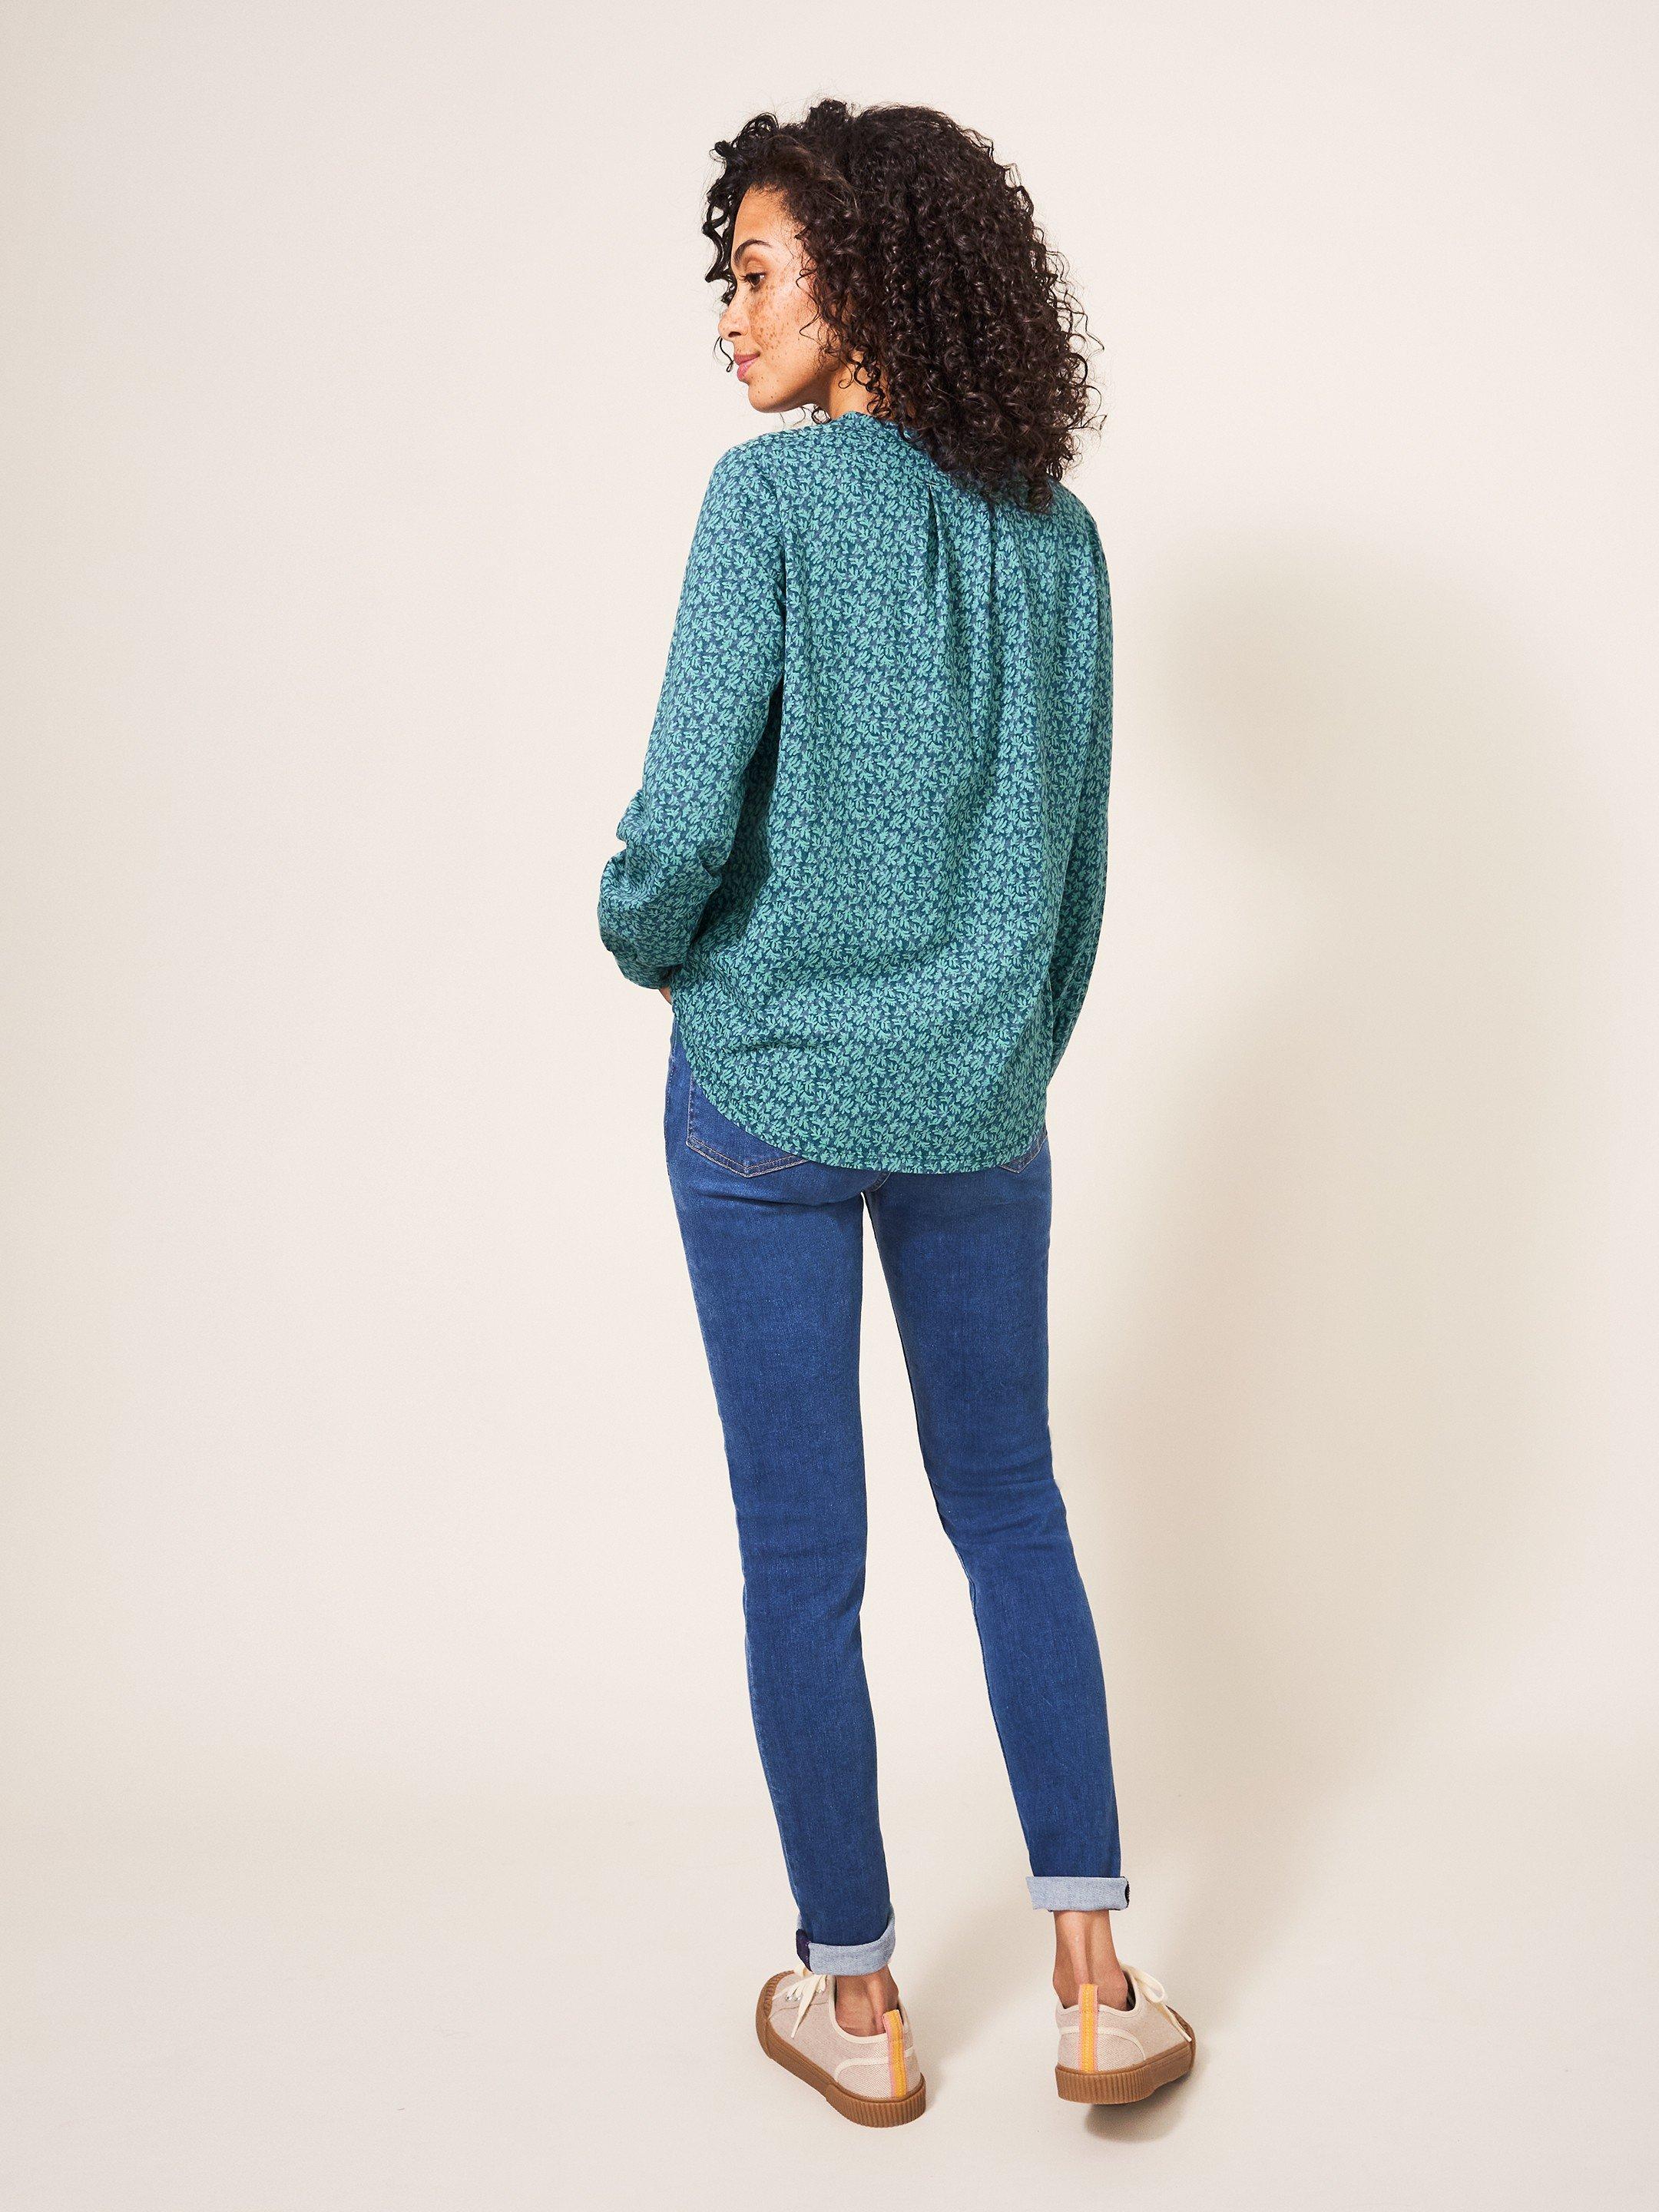 Belonging Button Through Top in TEAL MLT - MODEL BACK